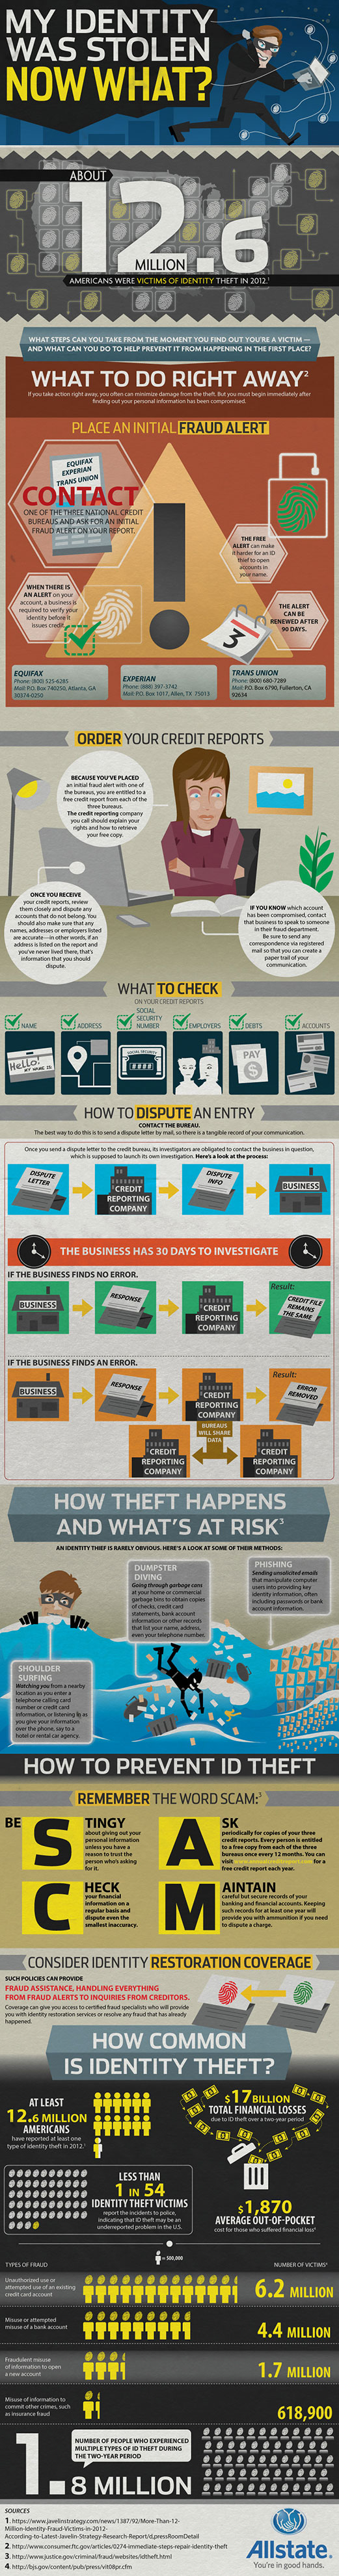 identity theft infographic by allstate